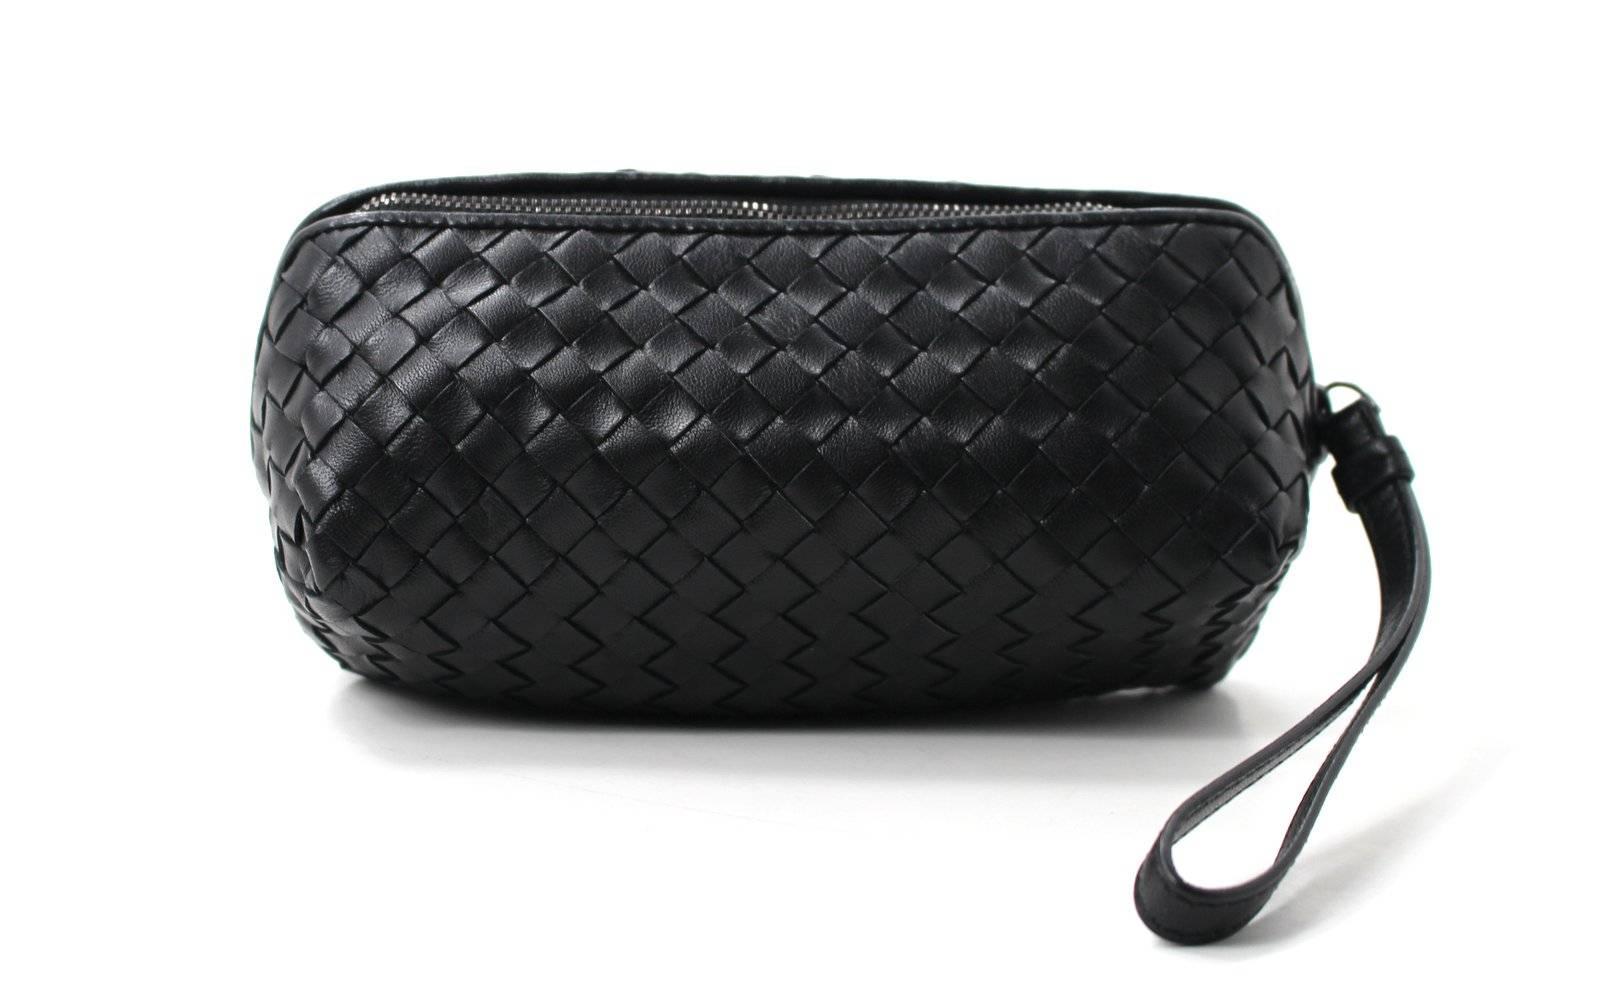 PRISTINE, New Condition- Bottega Veneta Black Leather Cosmetic Case/ Wristlet
Versatile and practical, this BV is equally at home carried on the wrist for a night out or tossed inside a larger tote.  Similar Bottega styles retail over